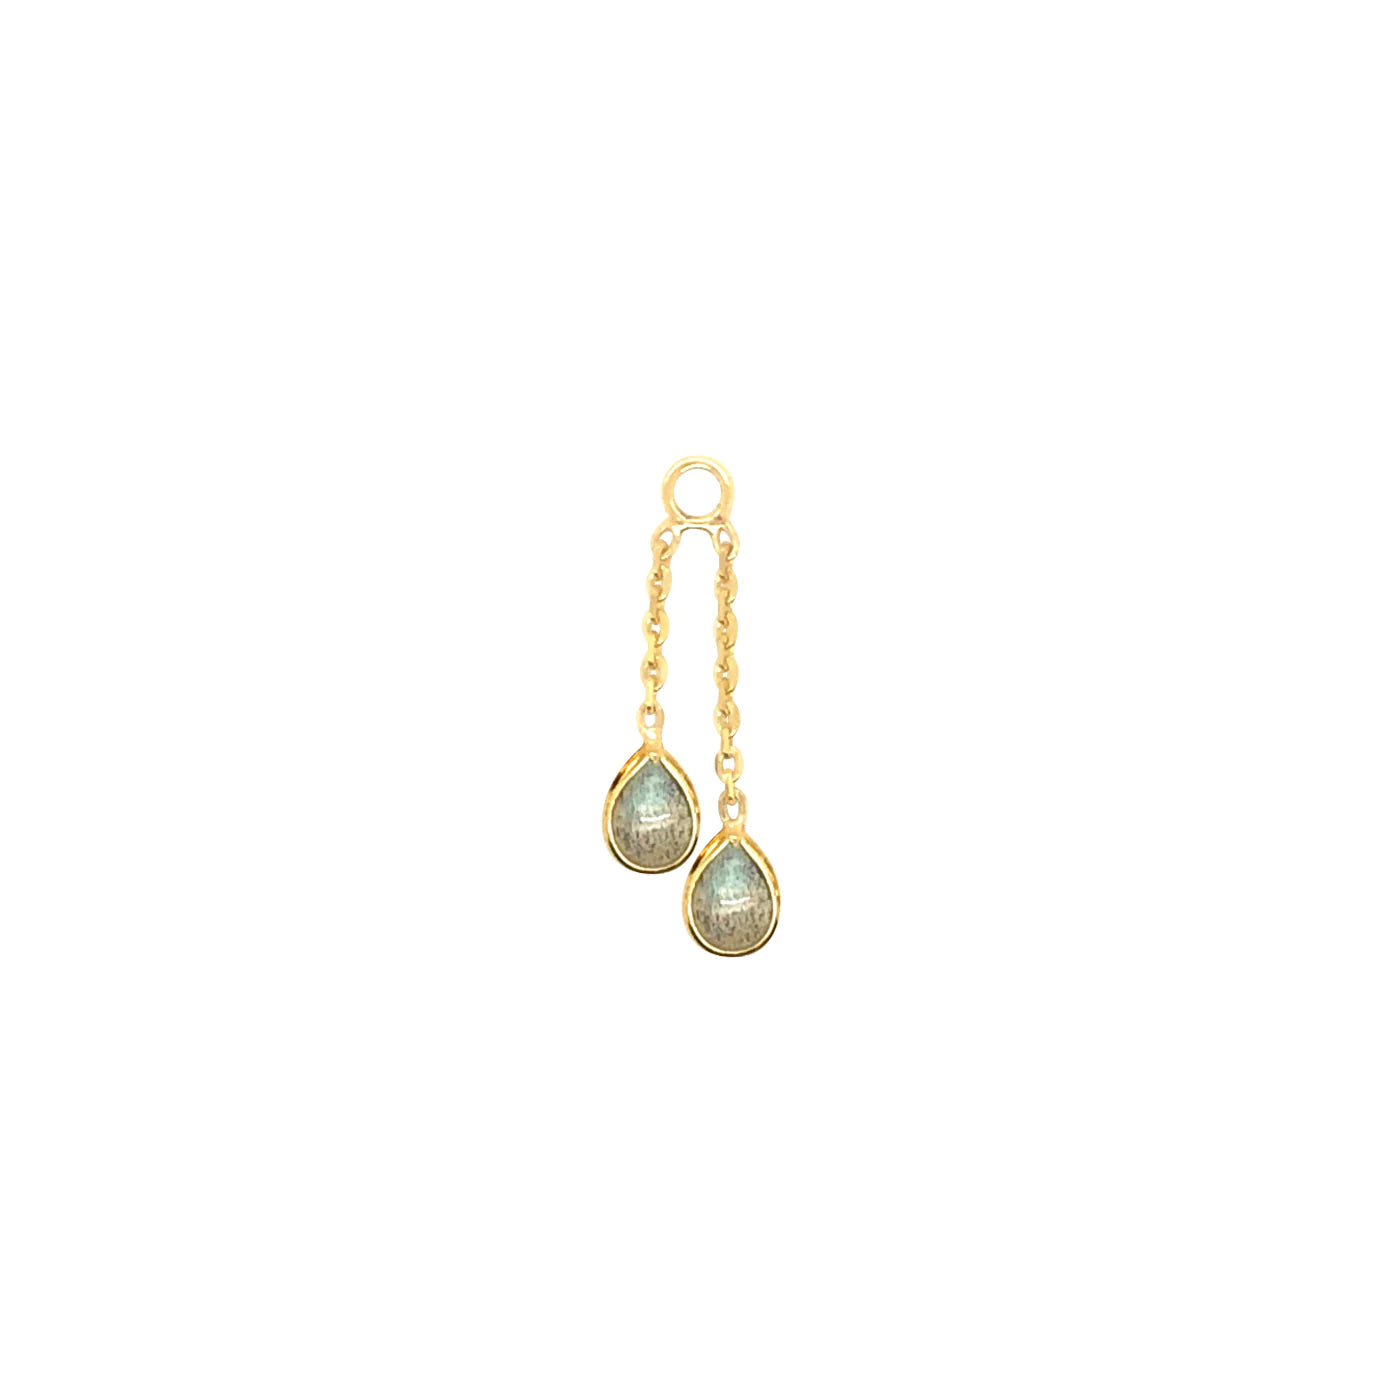 MODERN MOOD - DOUBLE PEAR CABOCHON BEZEL CHARM + CHAIN - 14KT SOLID YELLOW GOLD